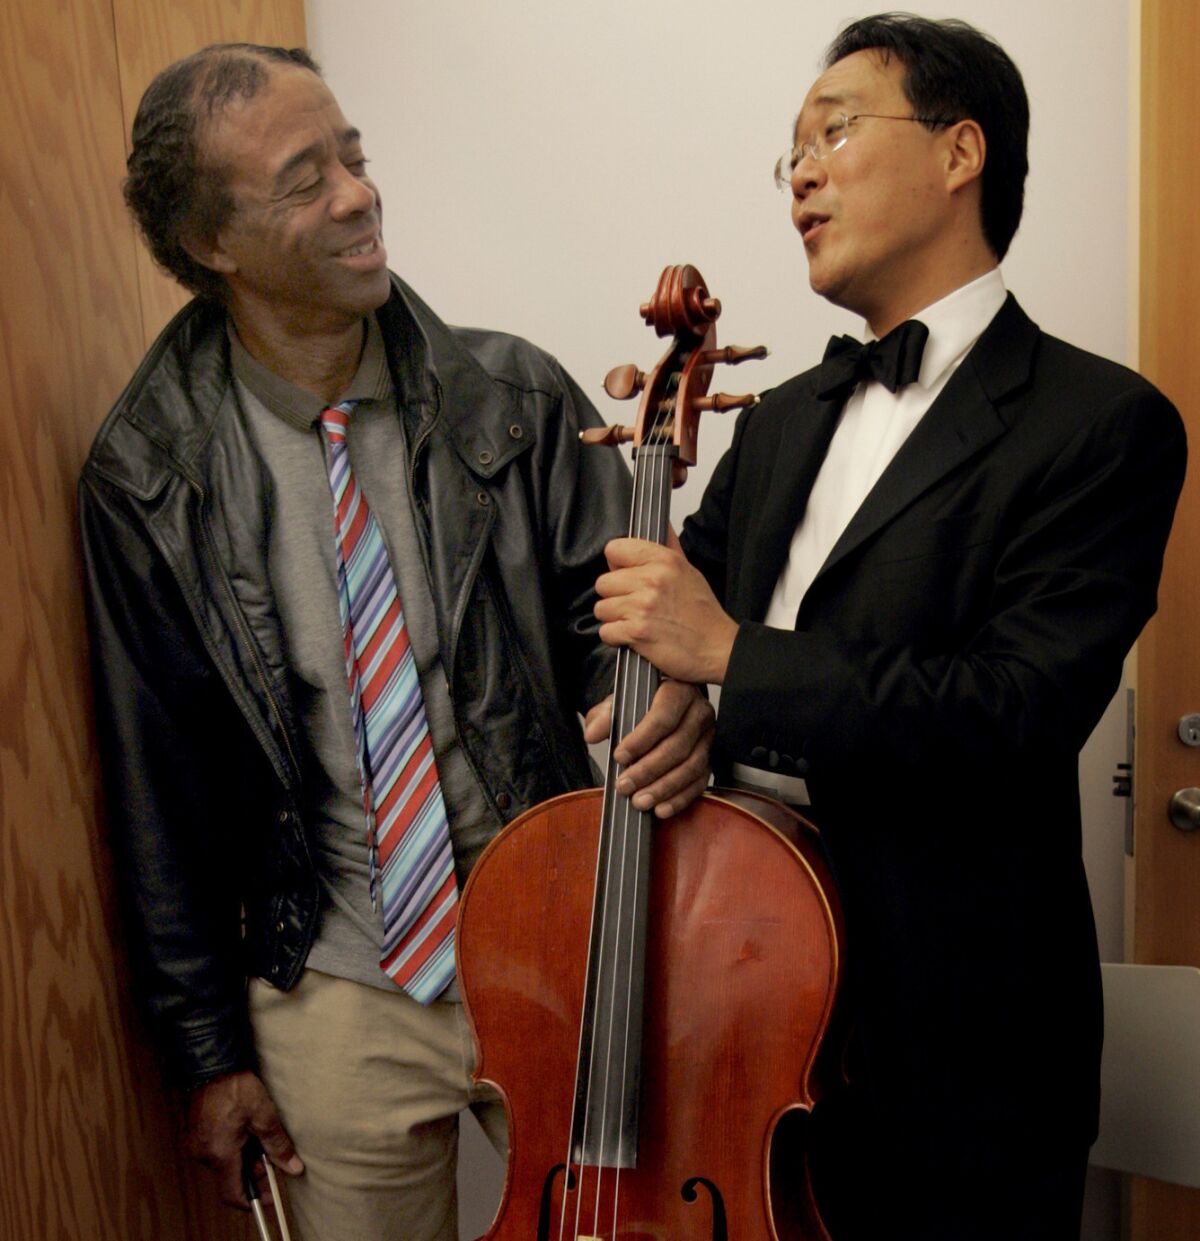 TOGETHER: Nathaniel Anthony Ayers and Yo-Yo Ma, who attended Juilliard at the same time, chat at Walt Disney Concert Hall.